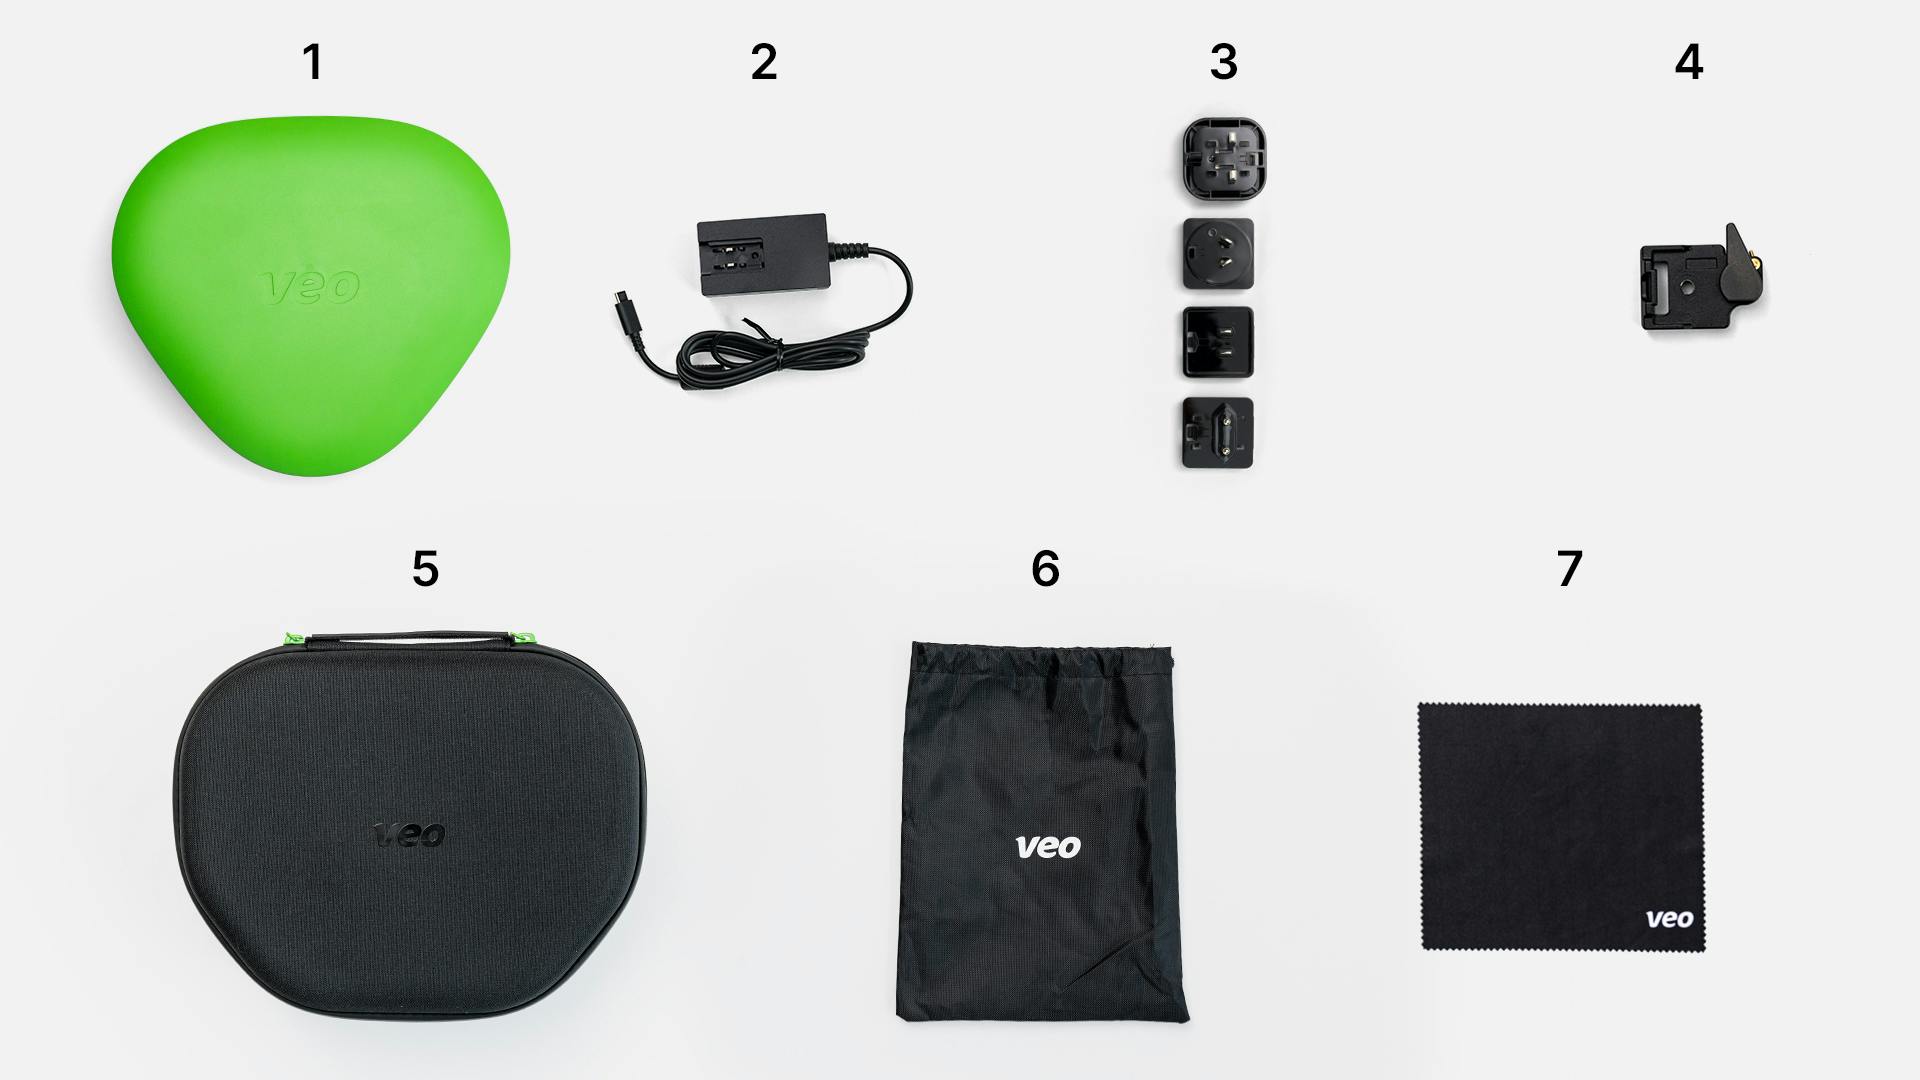 Accessories inside the Veo Camera 2 box. The image shows the additional items included with the camera for soccer match recording and analysis.